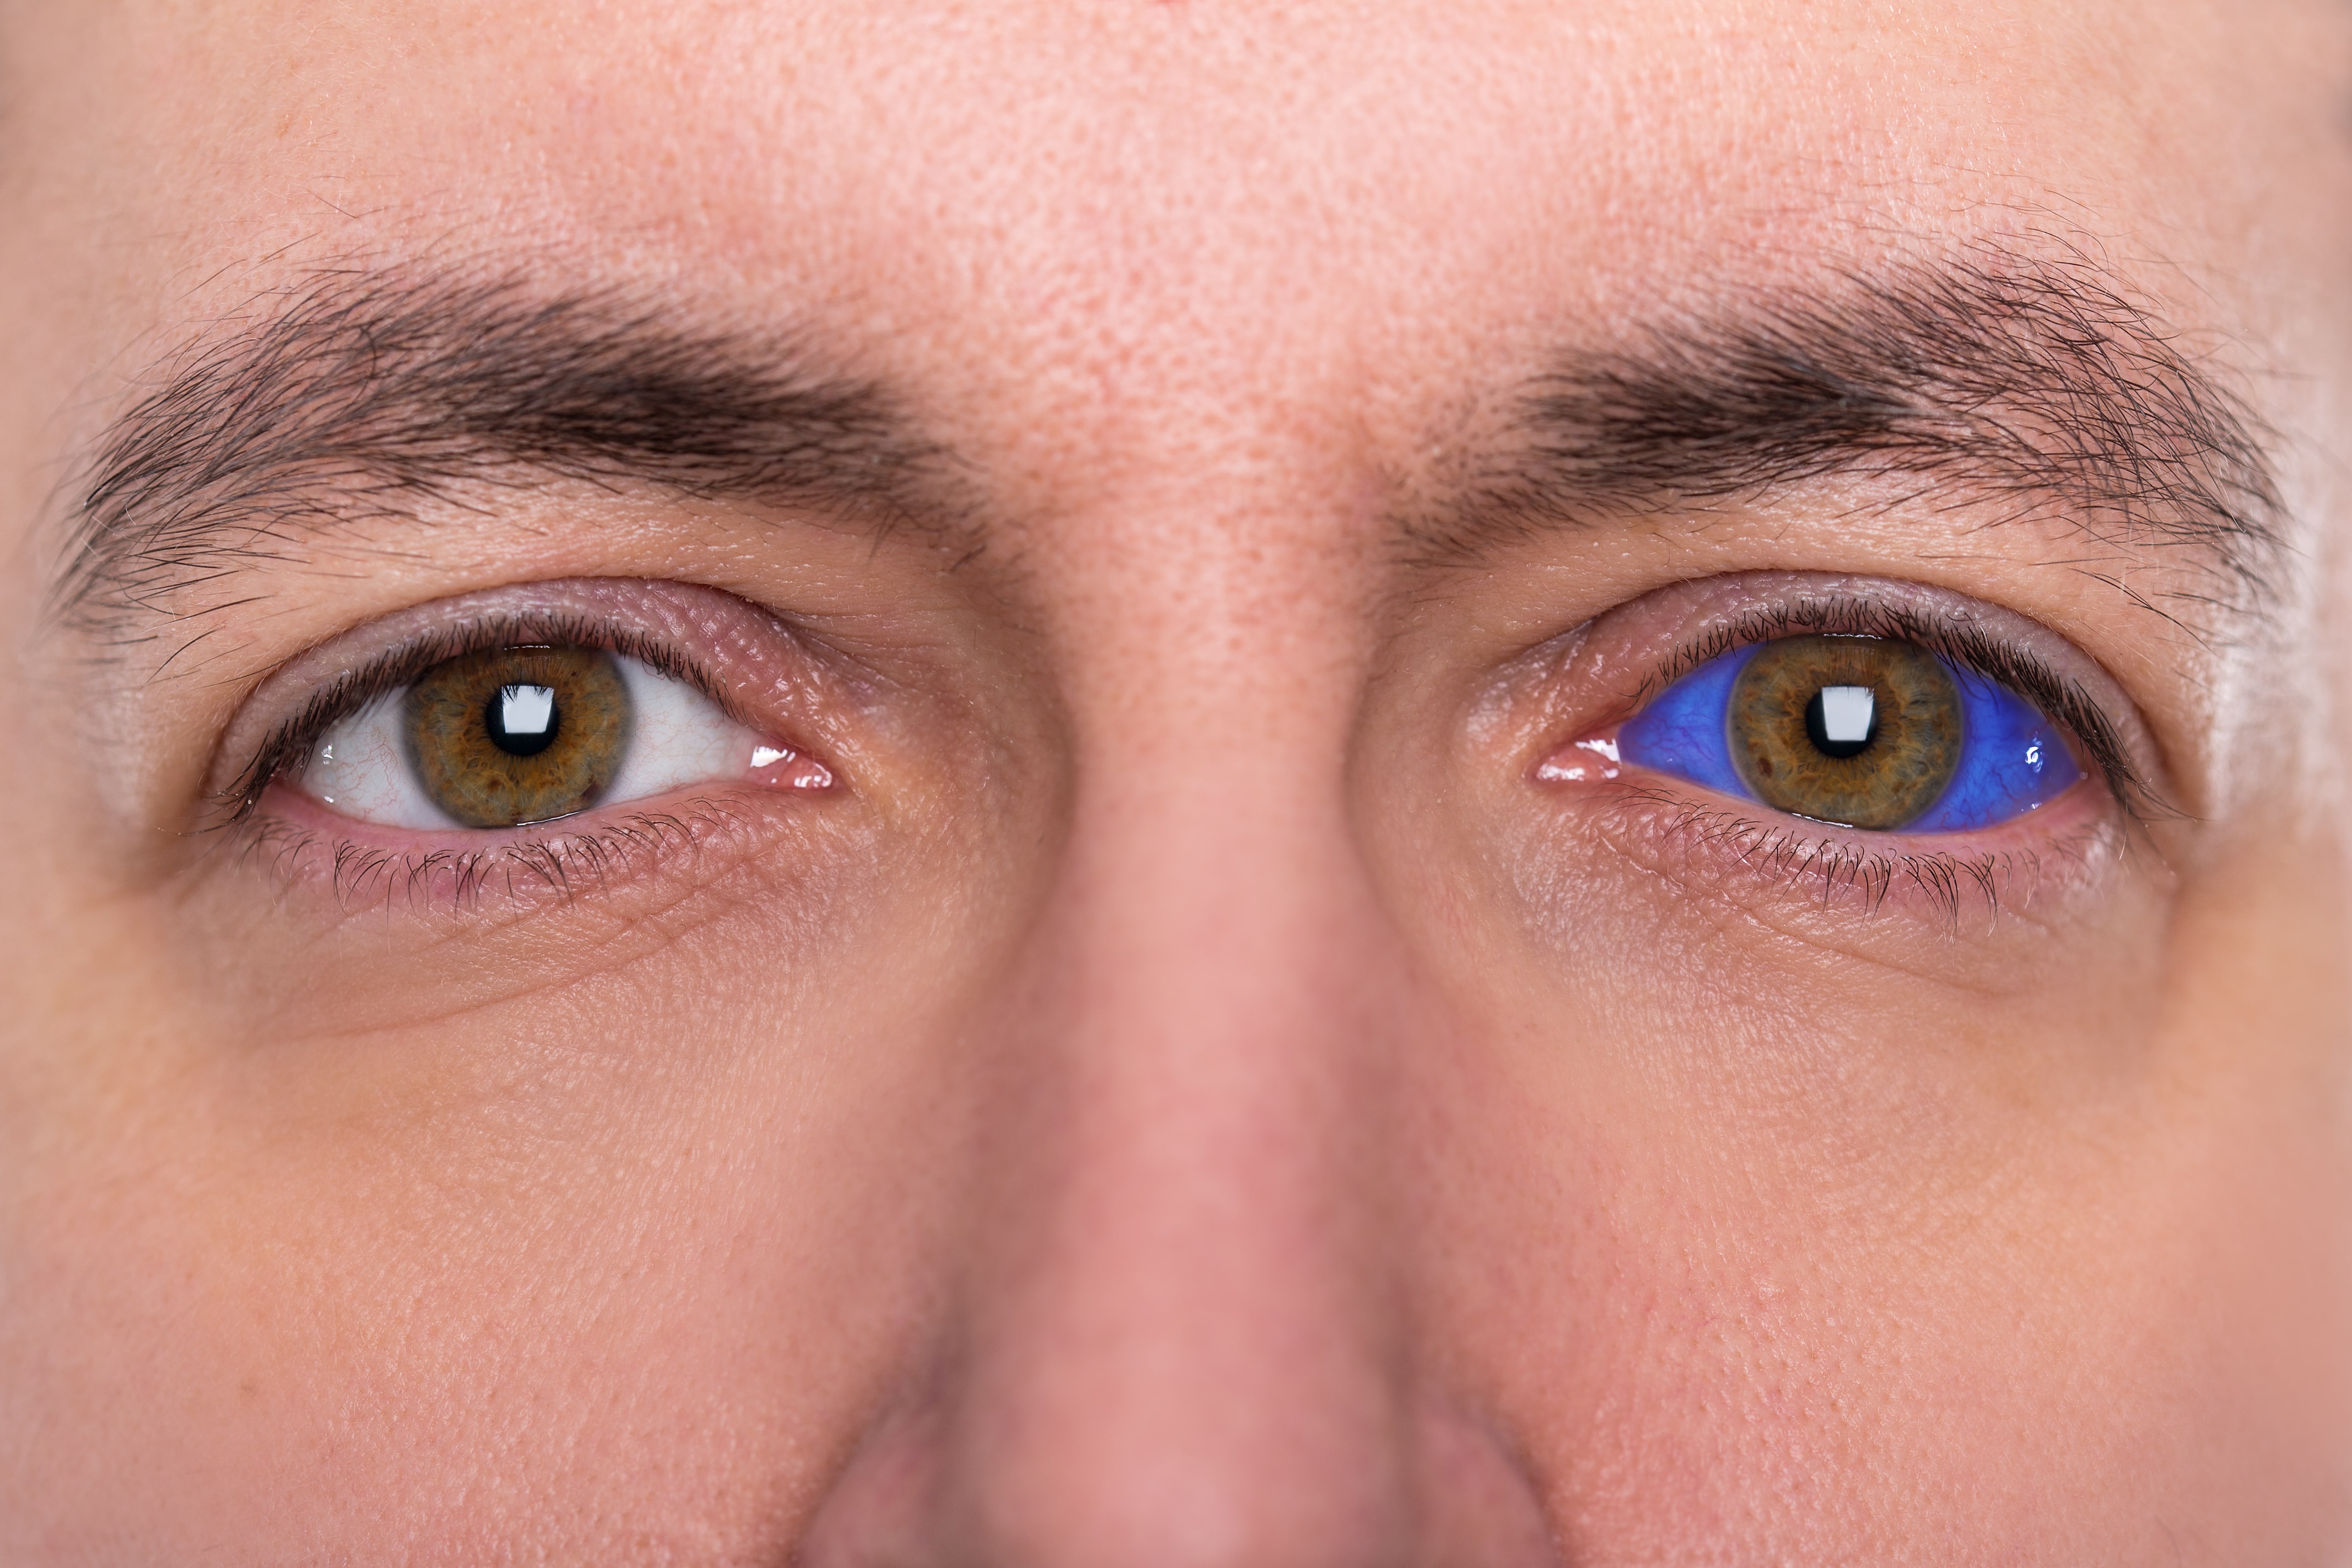 Image showing a closeup of a man with one normal eye and one eye with a blue sclera tattoo